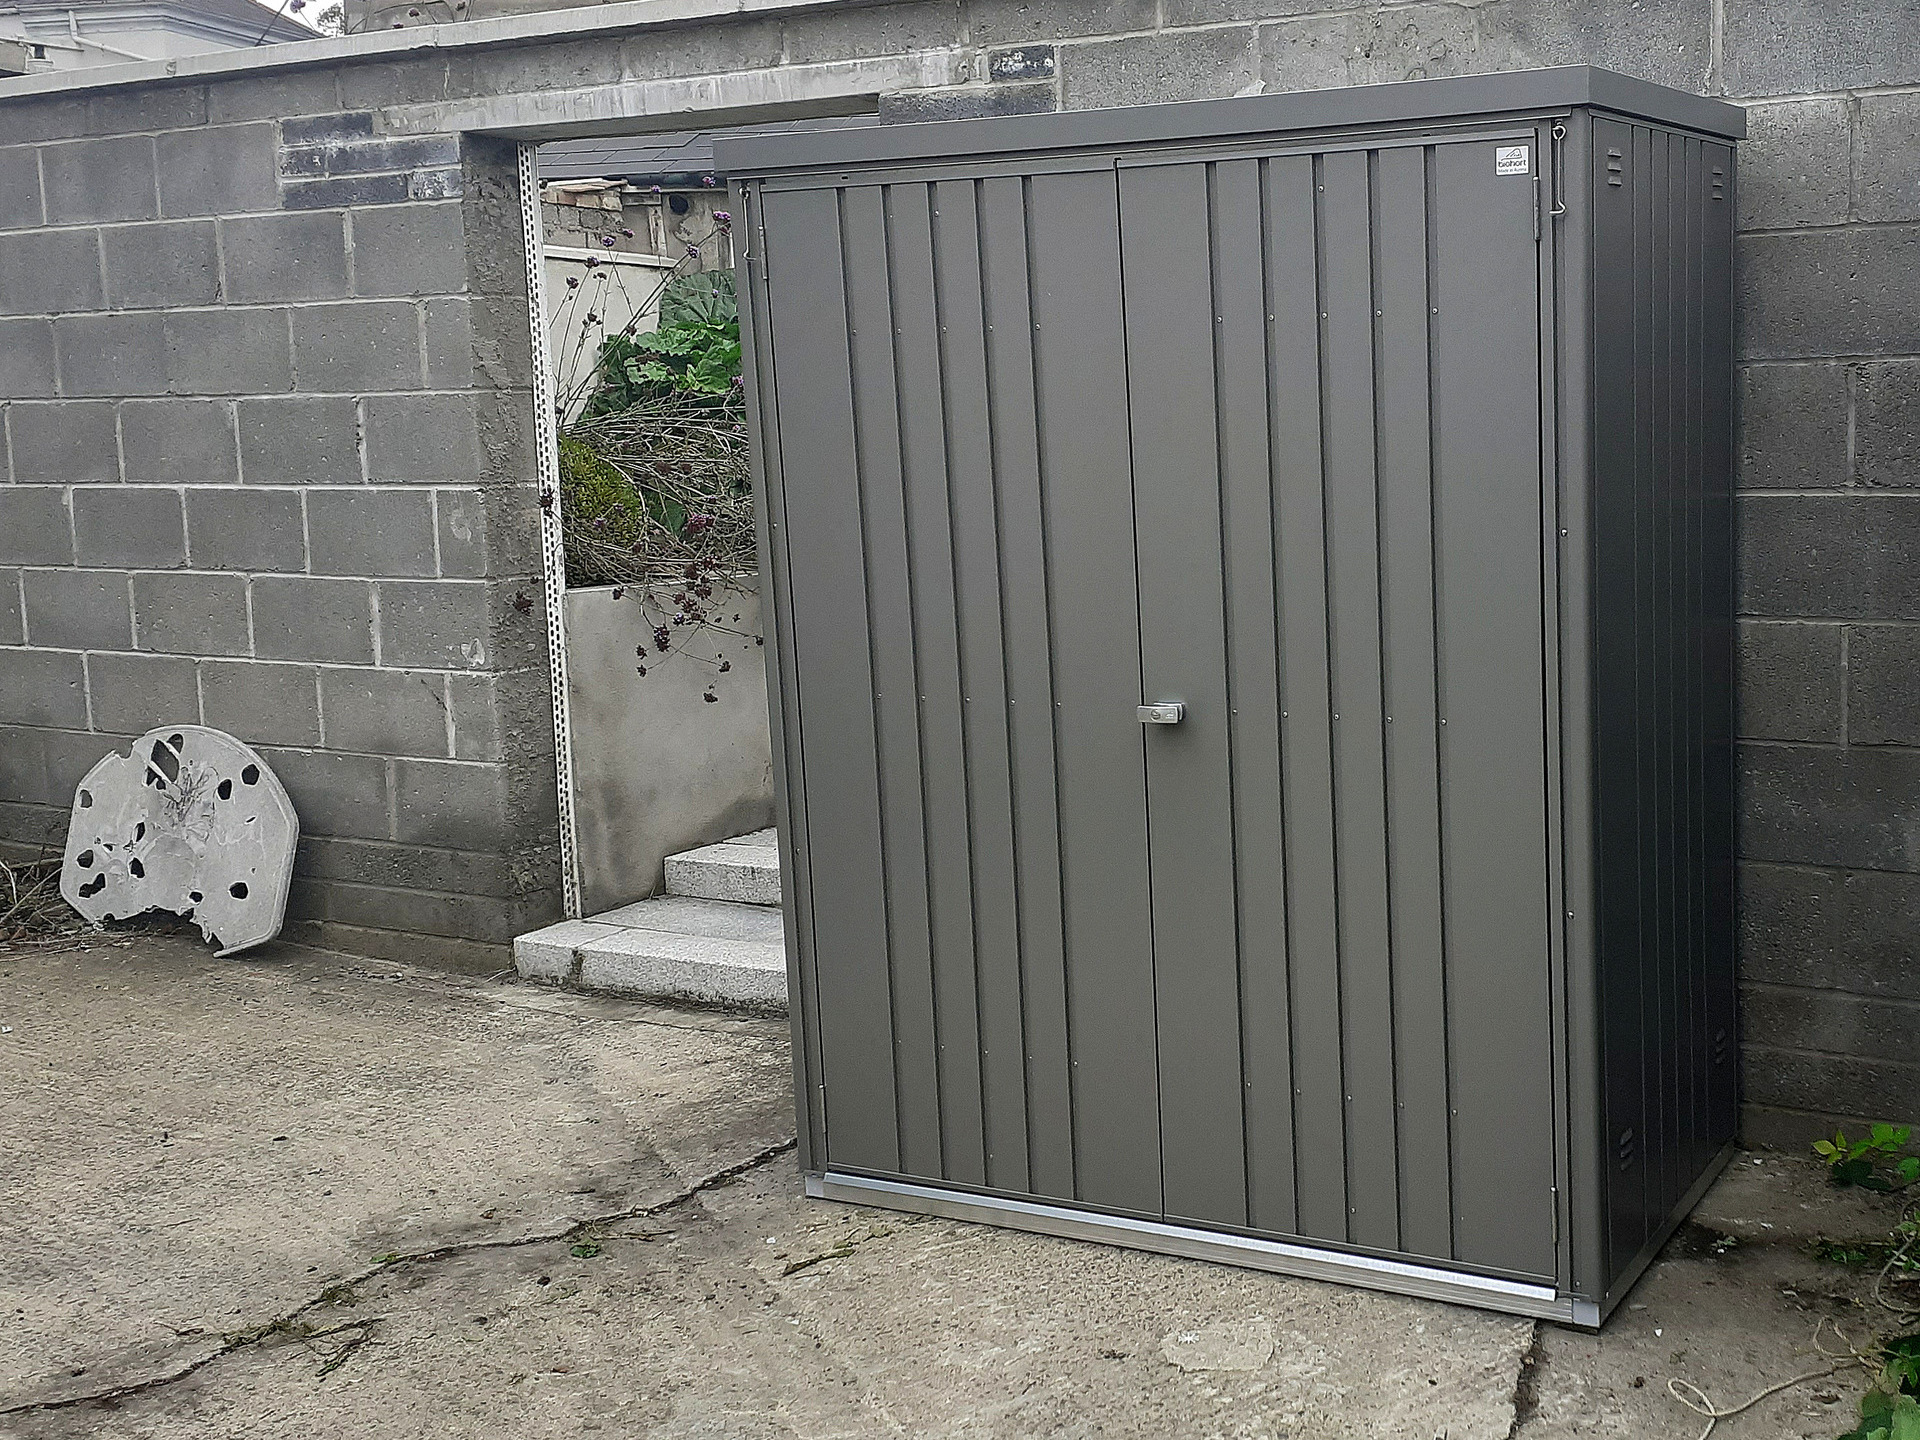 The superb quality and style of the Biohort Equipment Locker 150 in metallic quartz grey  with optional accessories including aluminium floor frame  | supplied + installed in Drumcondra, Dublin 9 by Owen Chubb Landscapers. Tel 087-2306 128.